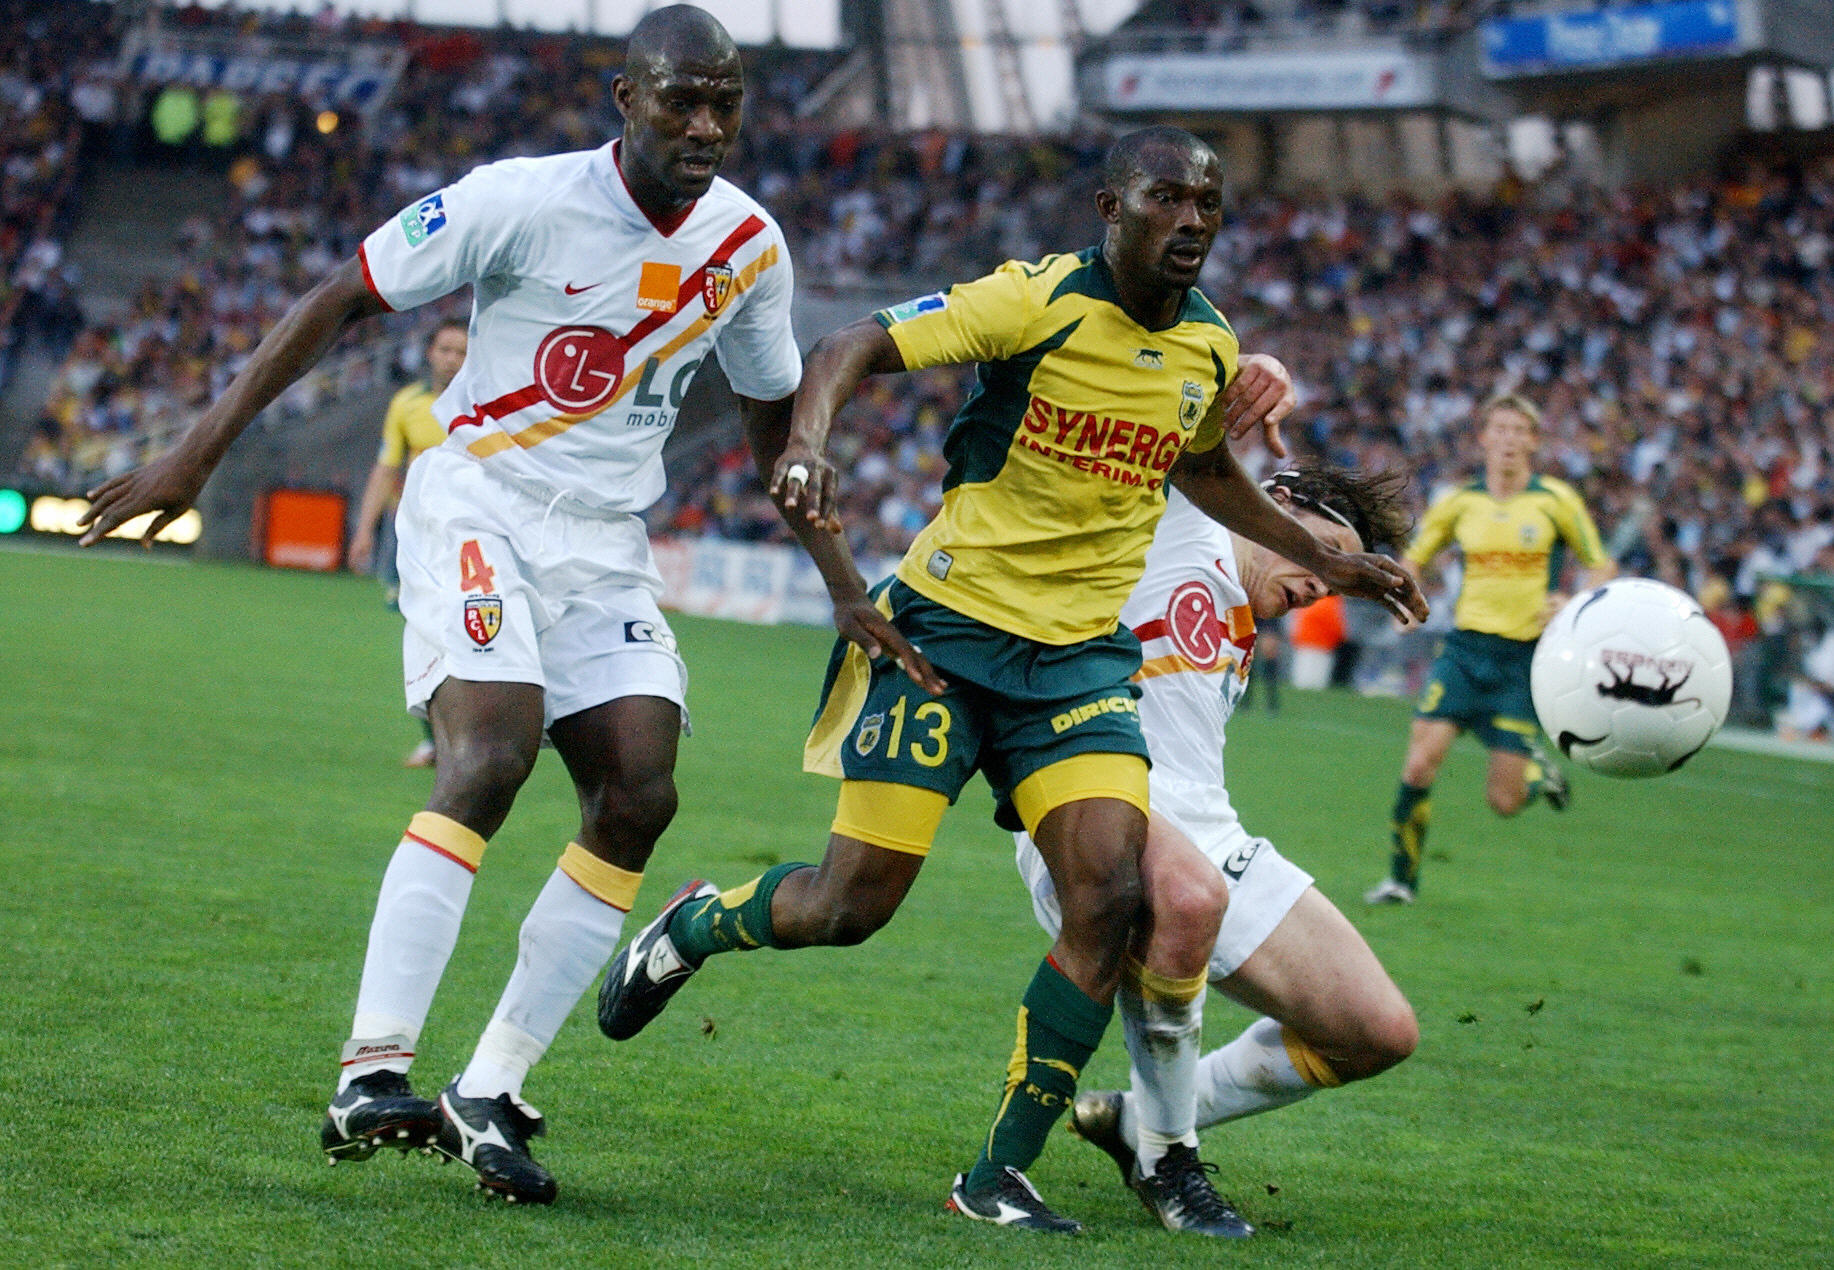 Nantes, FRANCE: Nantes' forward Mamadou Diallo (R) vies with Lens' s defender Adama Coulibaly (L) during their French L1 football match Nantes vs Lens, 14 April 2007 at the stadieum of La Beaujoire in Nantes. AFP PHOTO FRANCK PERRY (Photo credit should read FRANCK PERRY/AFP/Getty Images)